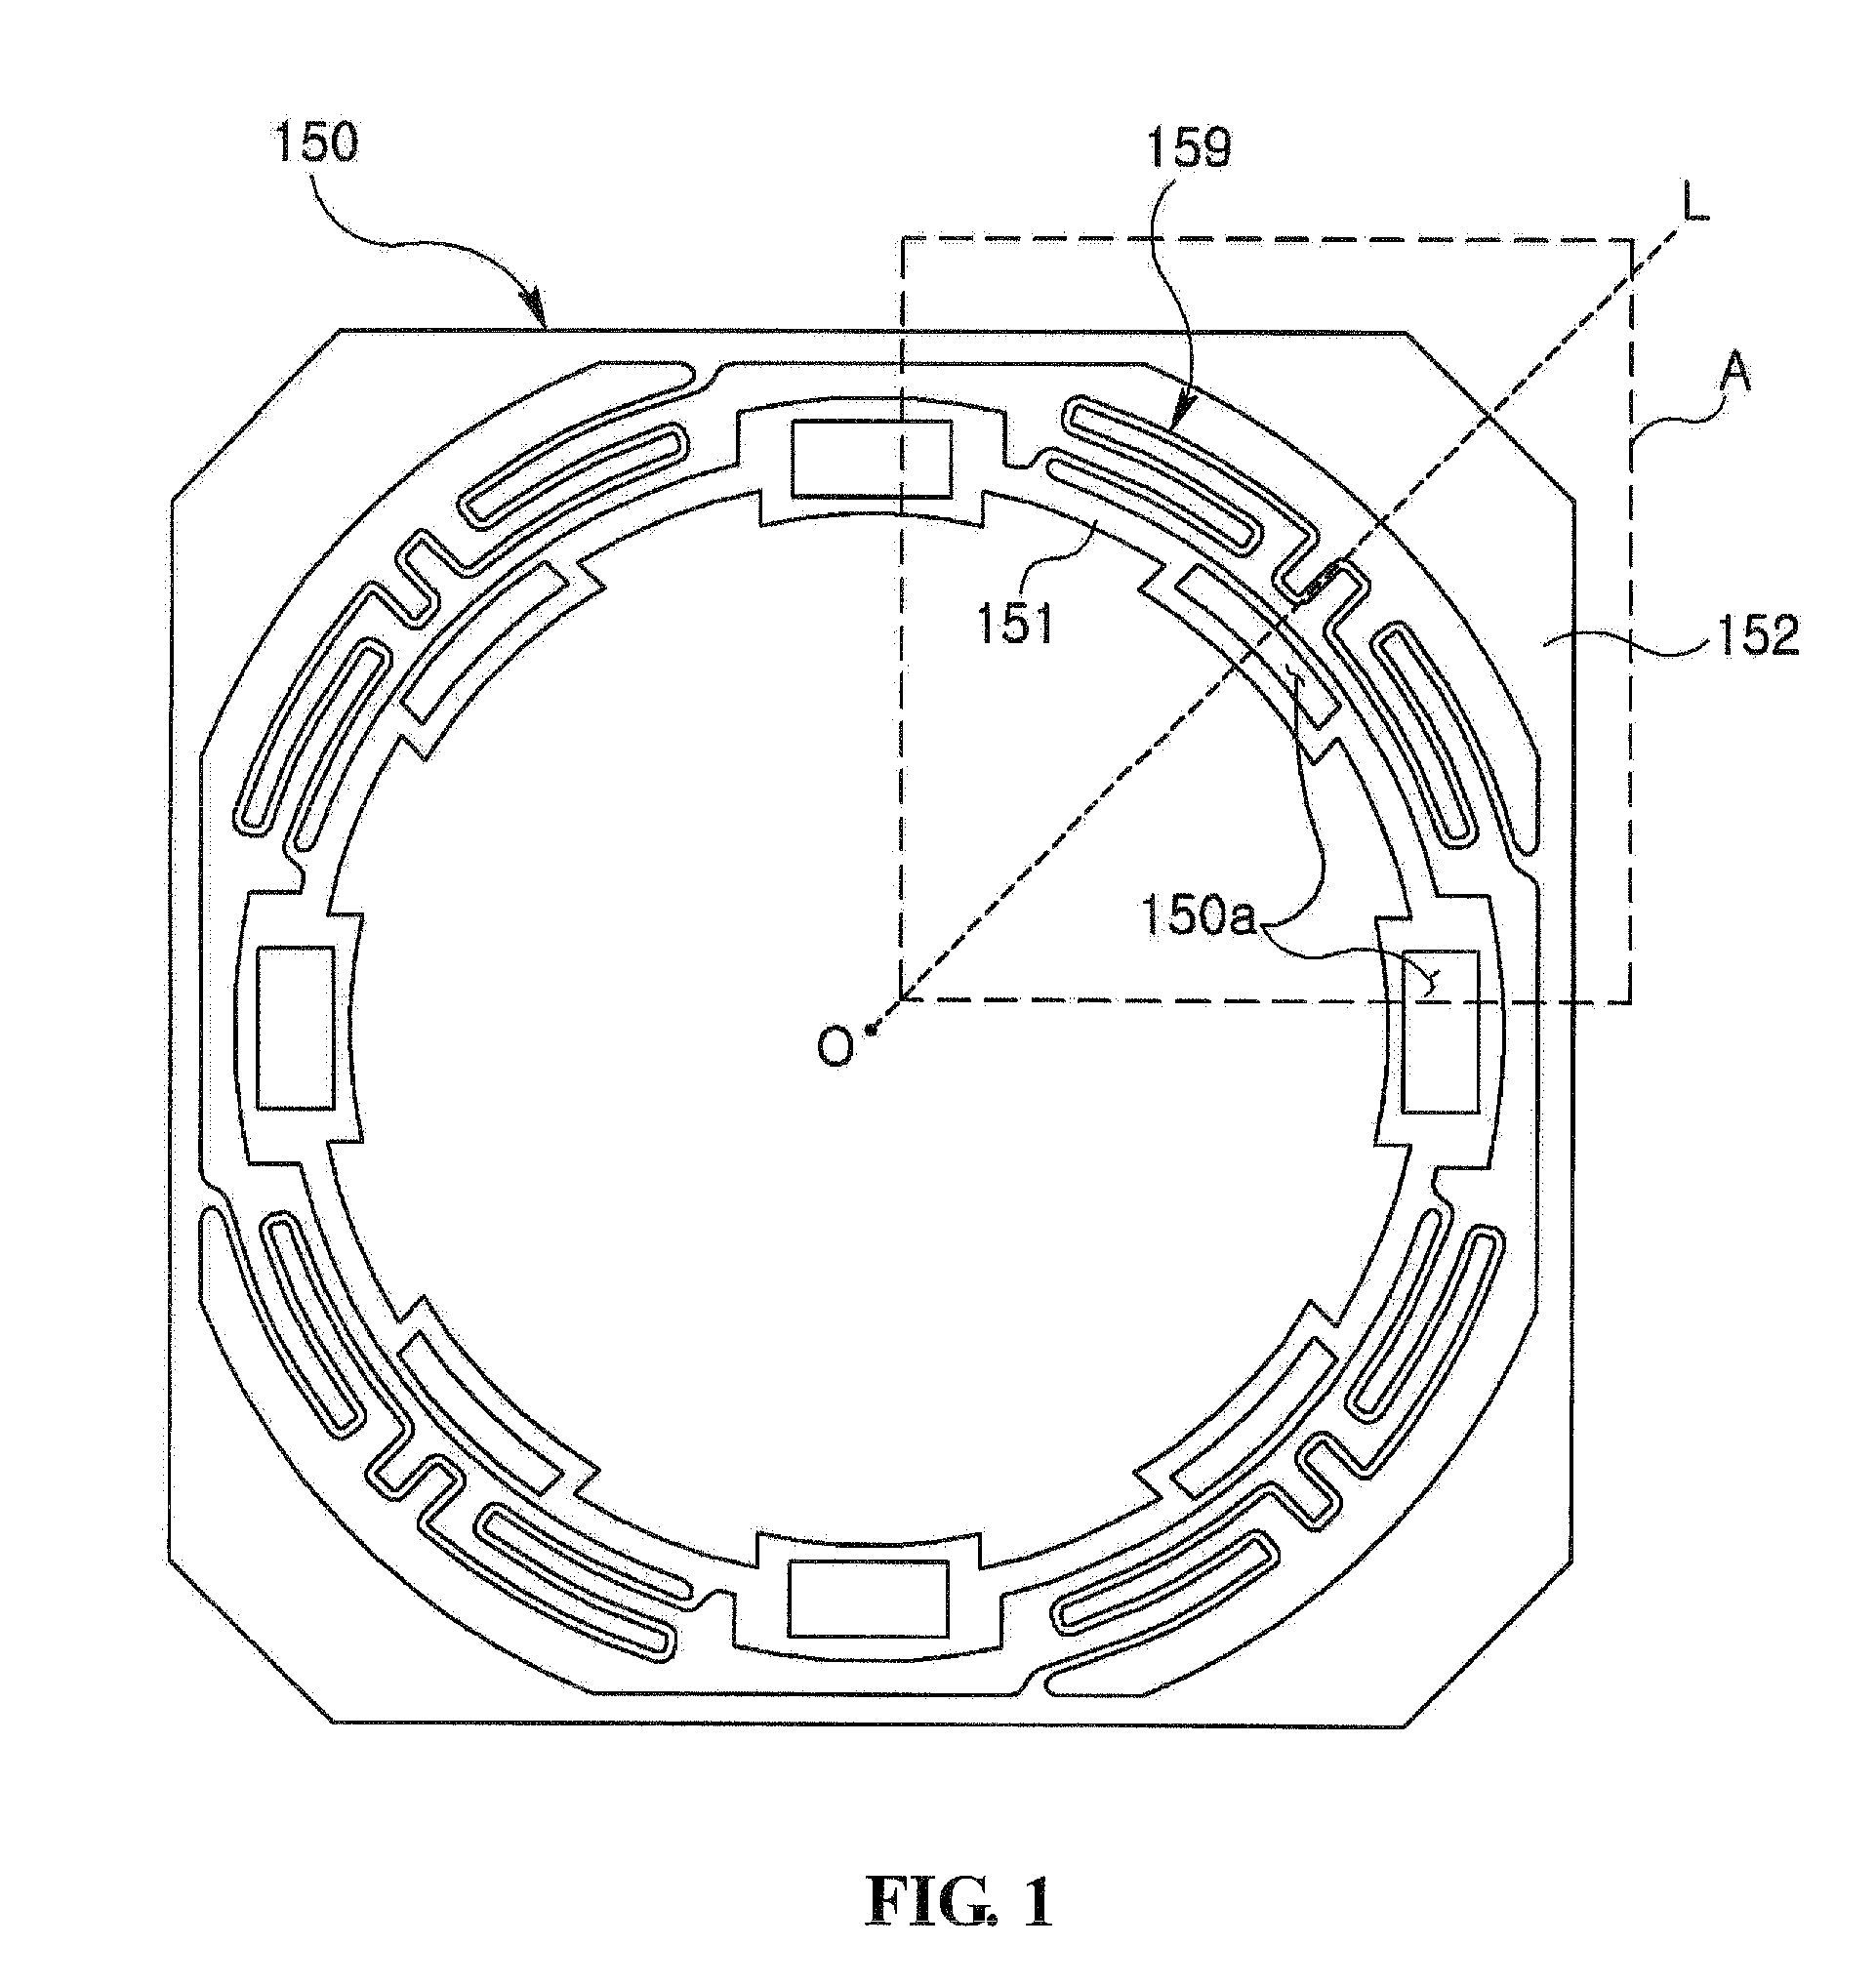 Flat spring and voice coil motor using the same